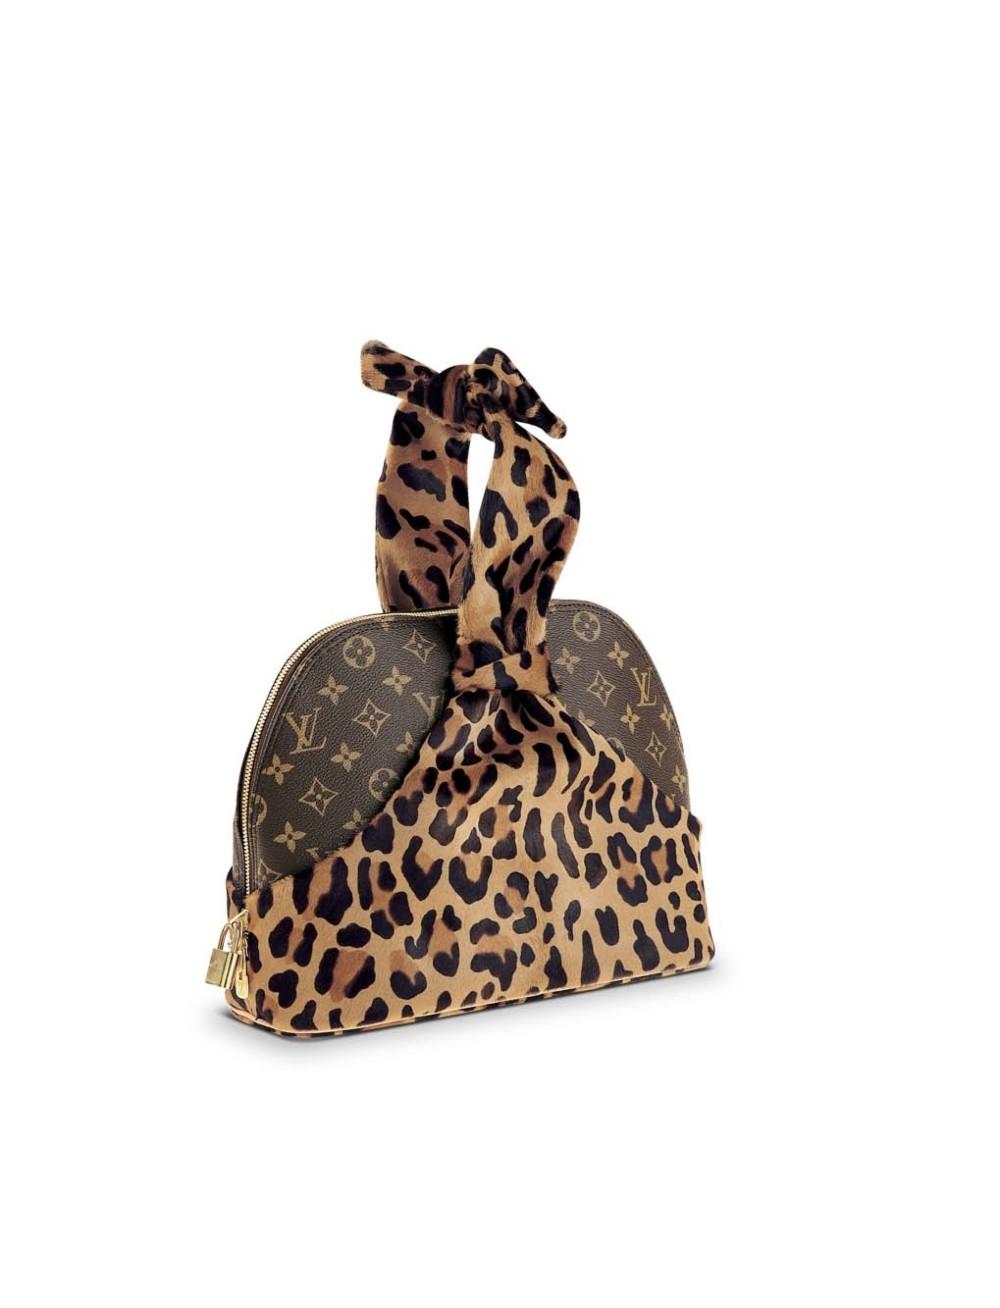 rare limited edition louis vuitton bags